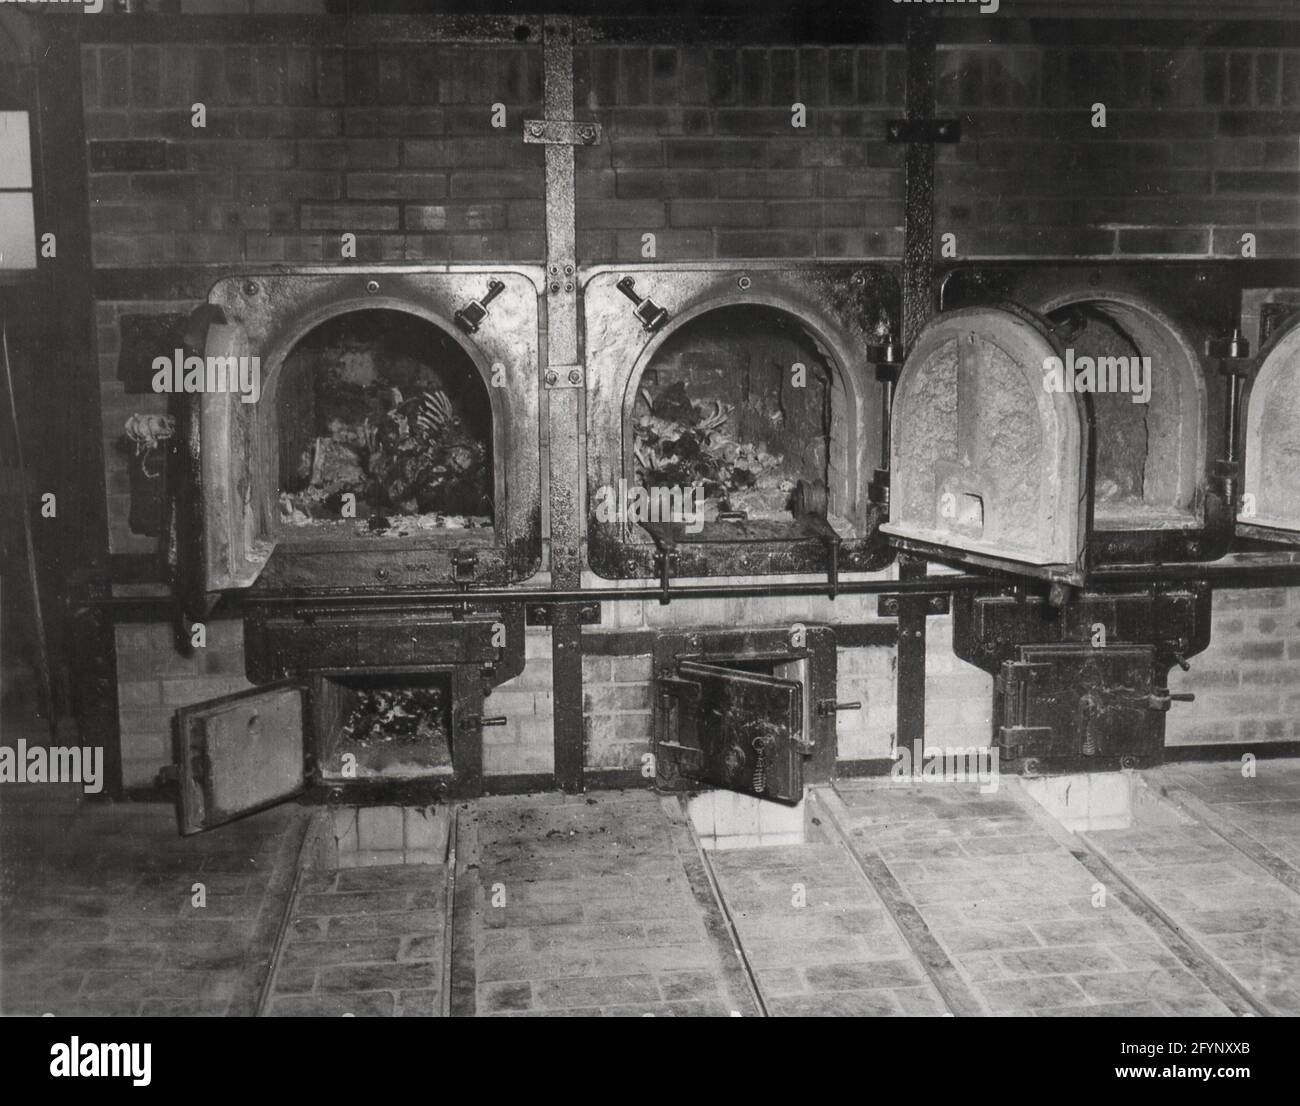 World War Two WWII Holocaust atrocity crematorium at the Buchenwald concentration camp taken by Pfc. W. Chichersky of the 3rd US Army, April 14, 1945  cremation of Jews by the Nazis Stock Photo